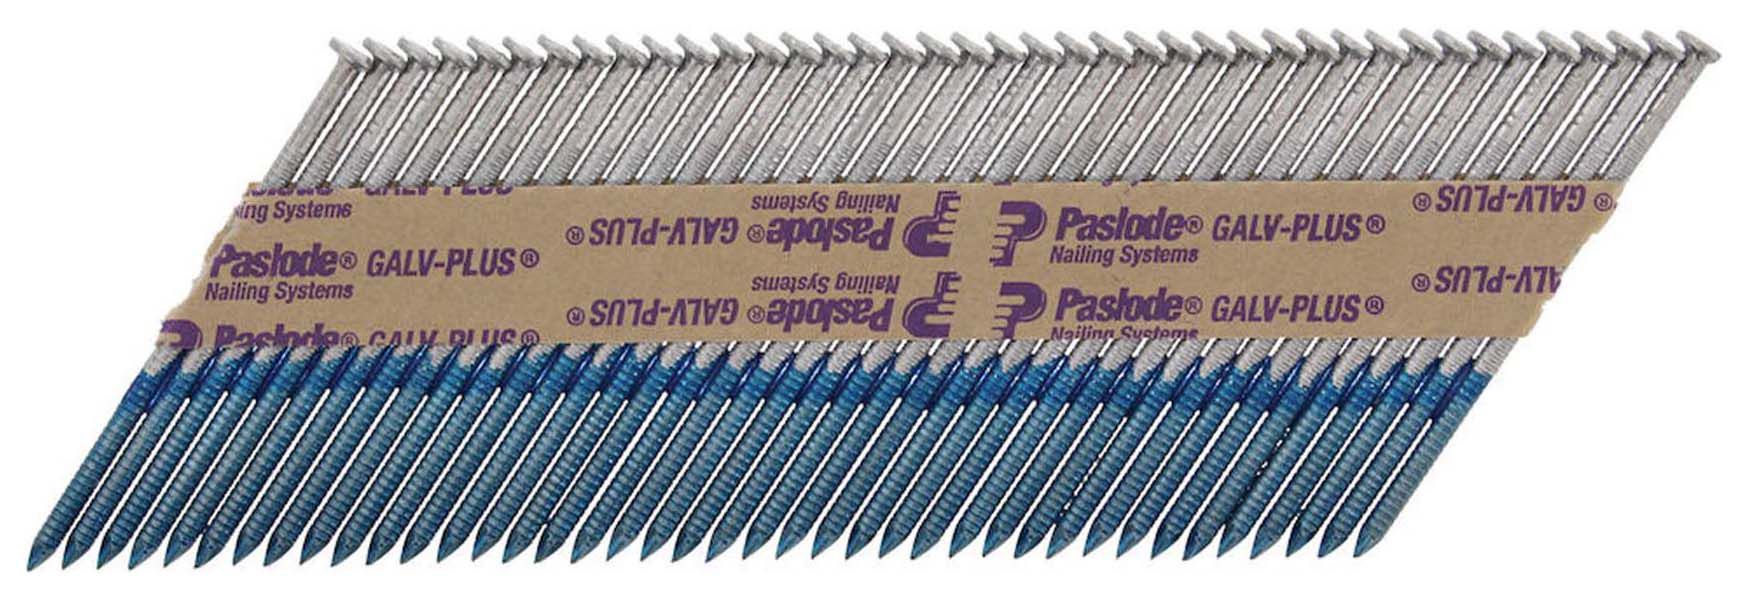 Paslode 3.1 x 90mm IM360 Collated Ring Nails + 2 Fuel Cells - Pack of 2200